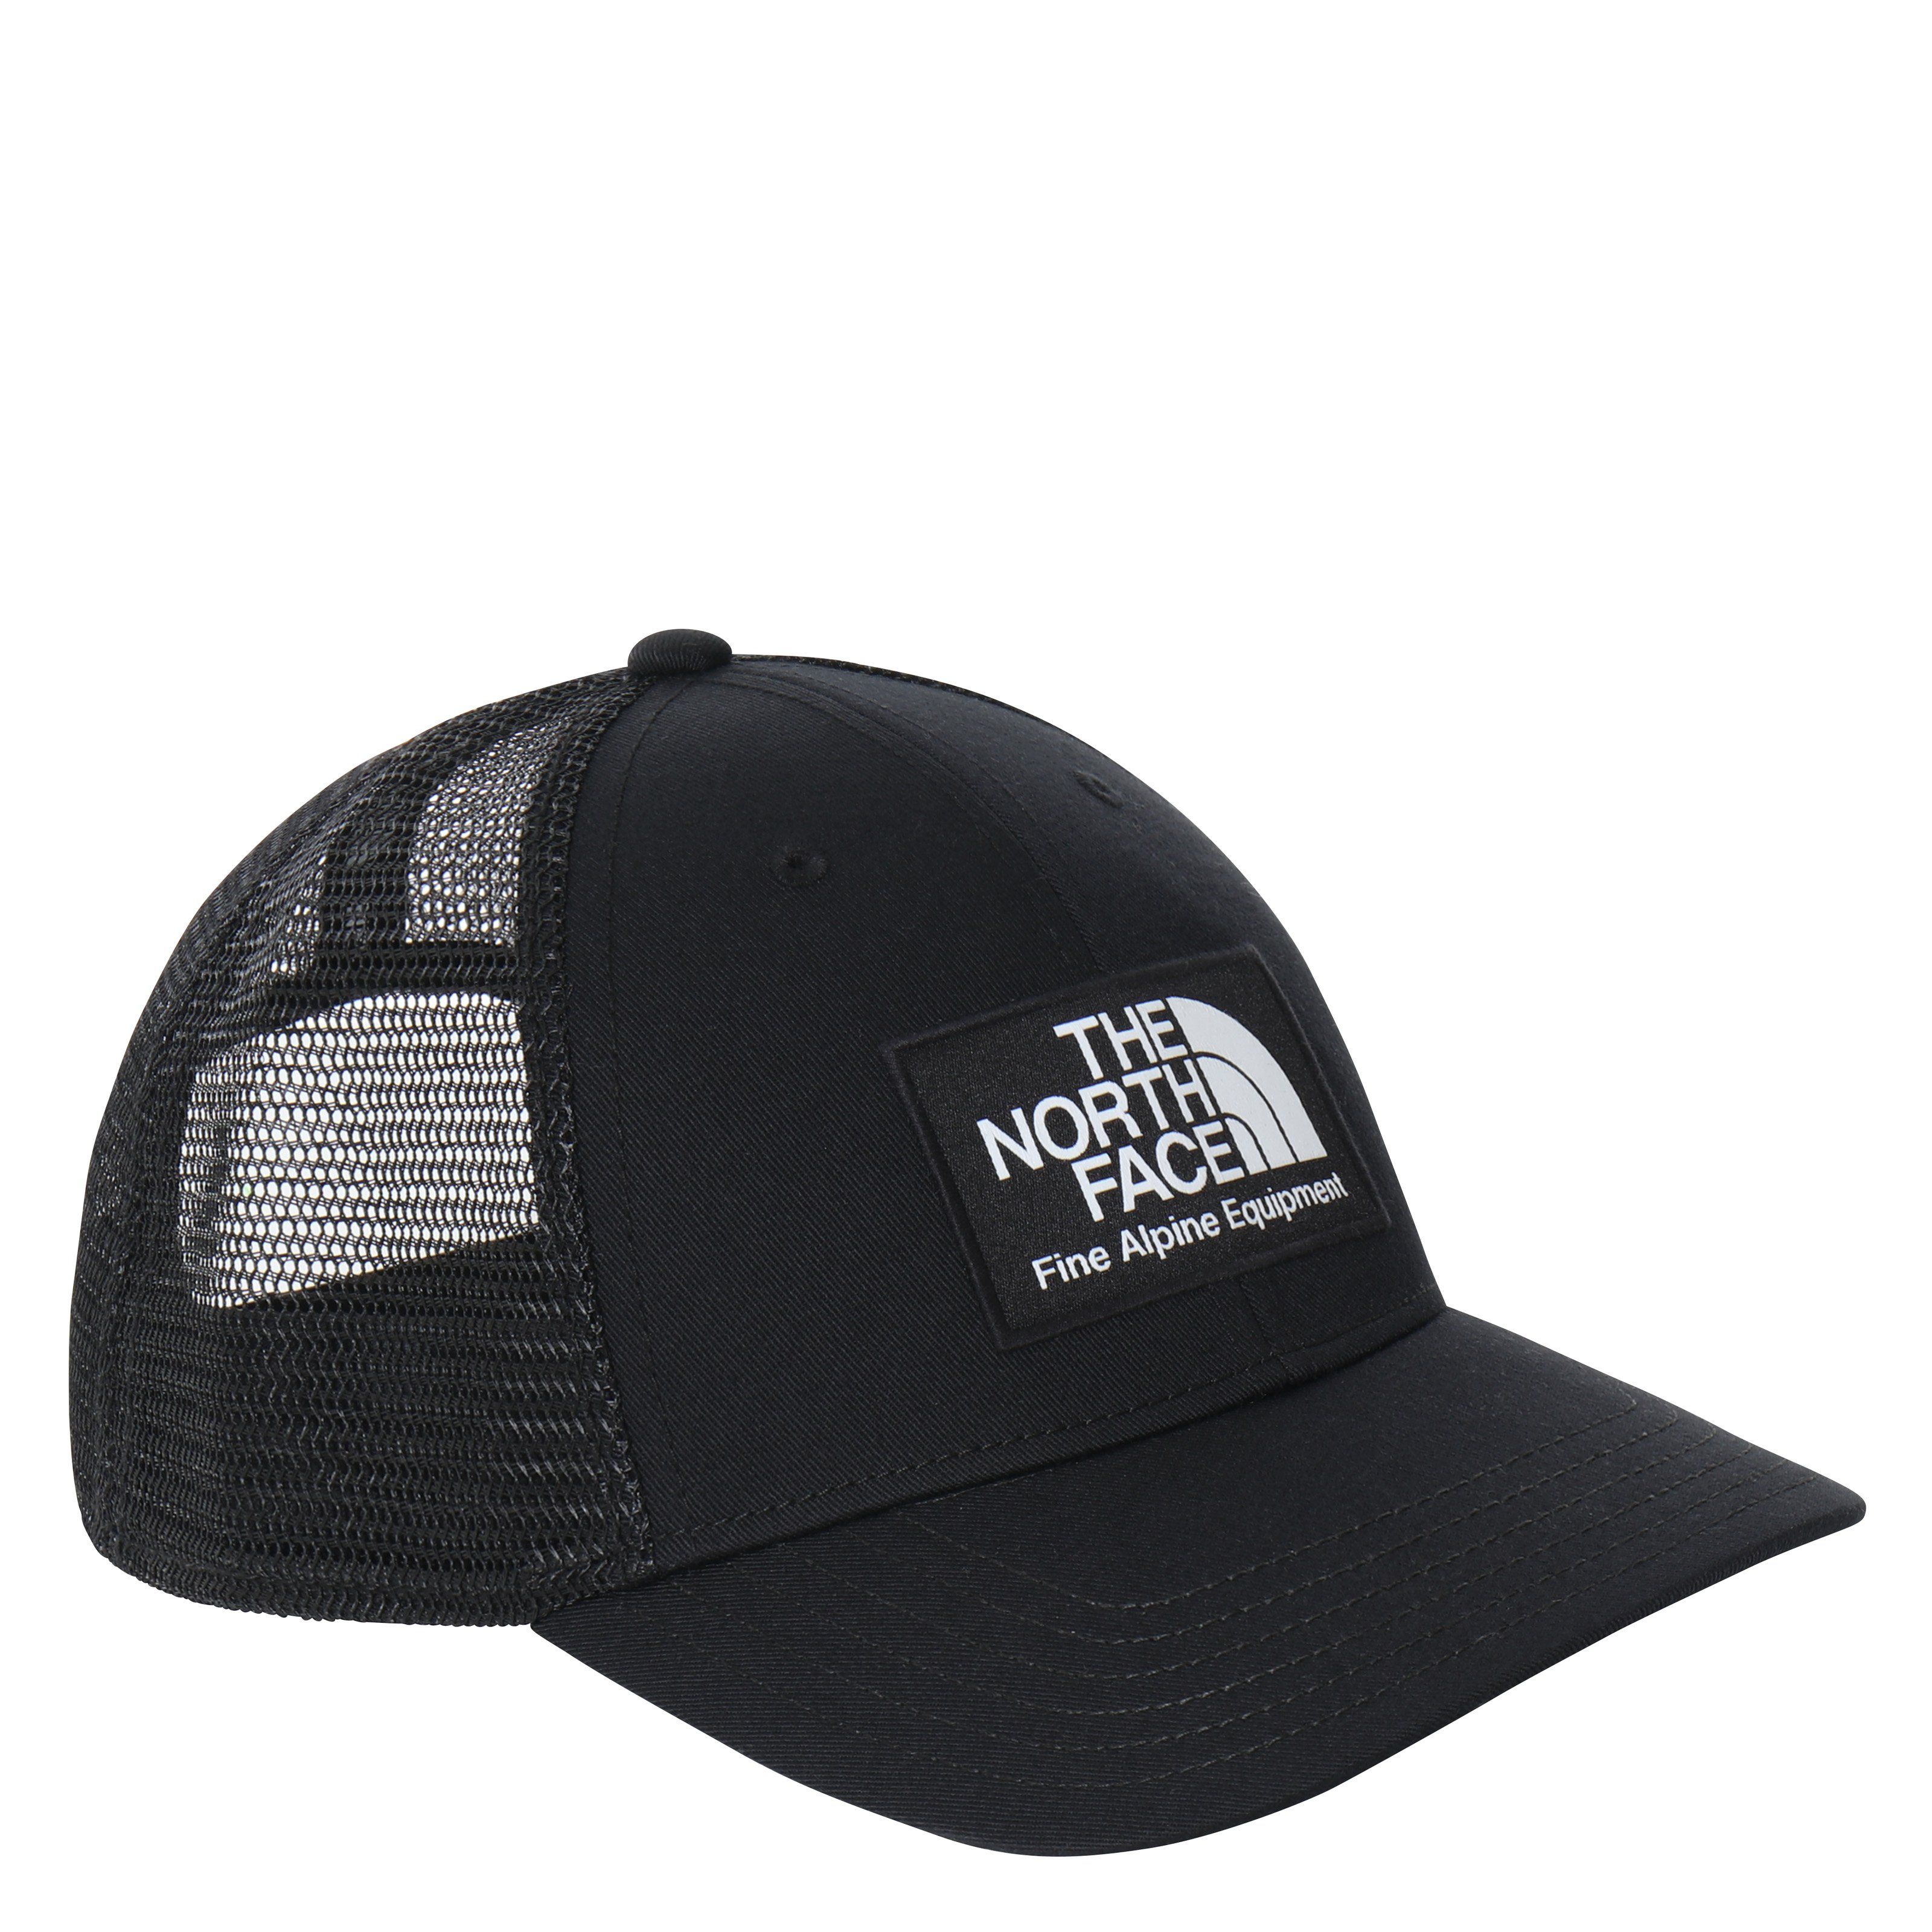 The North Face - M's Mudder Trucker